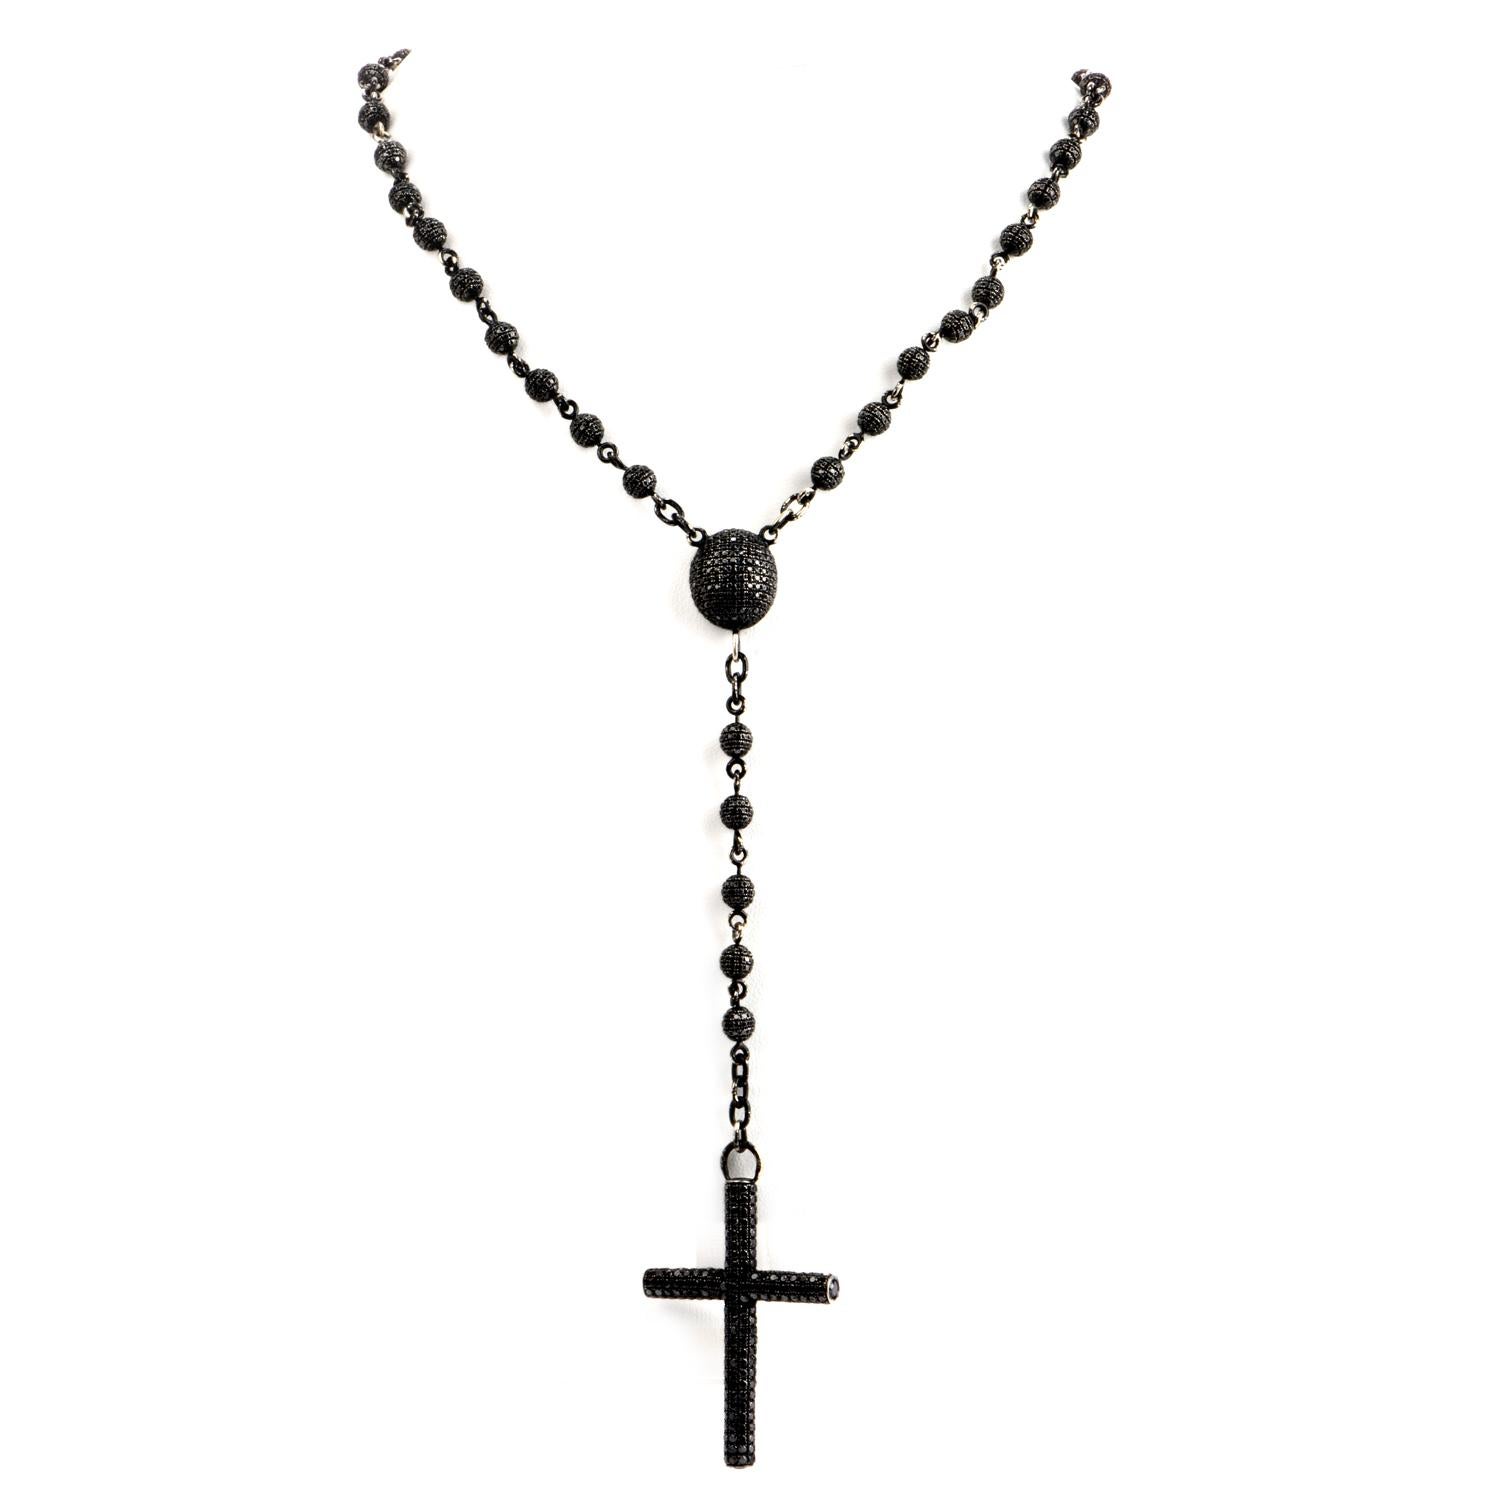 This mystical rosary necklace will take you to another world with its captivating appeal.  

It is crafted in 14k solid gold and embellished with round cut, pave set Black diamonds.

This necklace has an impressive gram weight of approximately 87.20